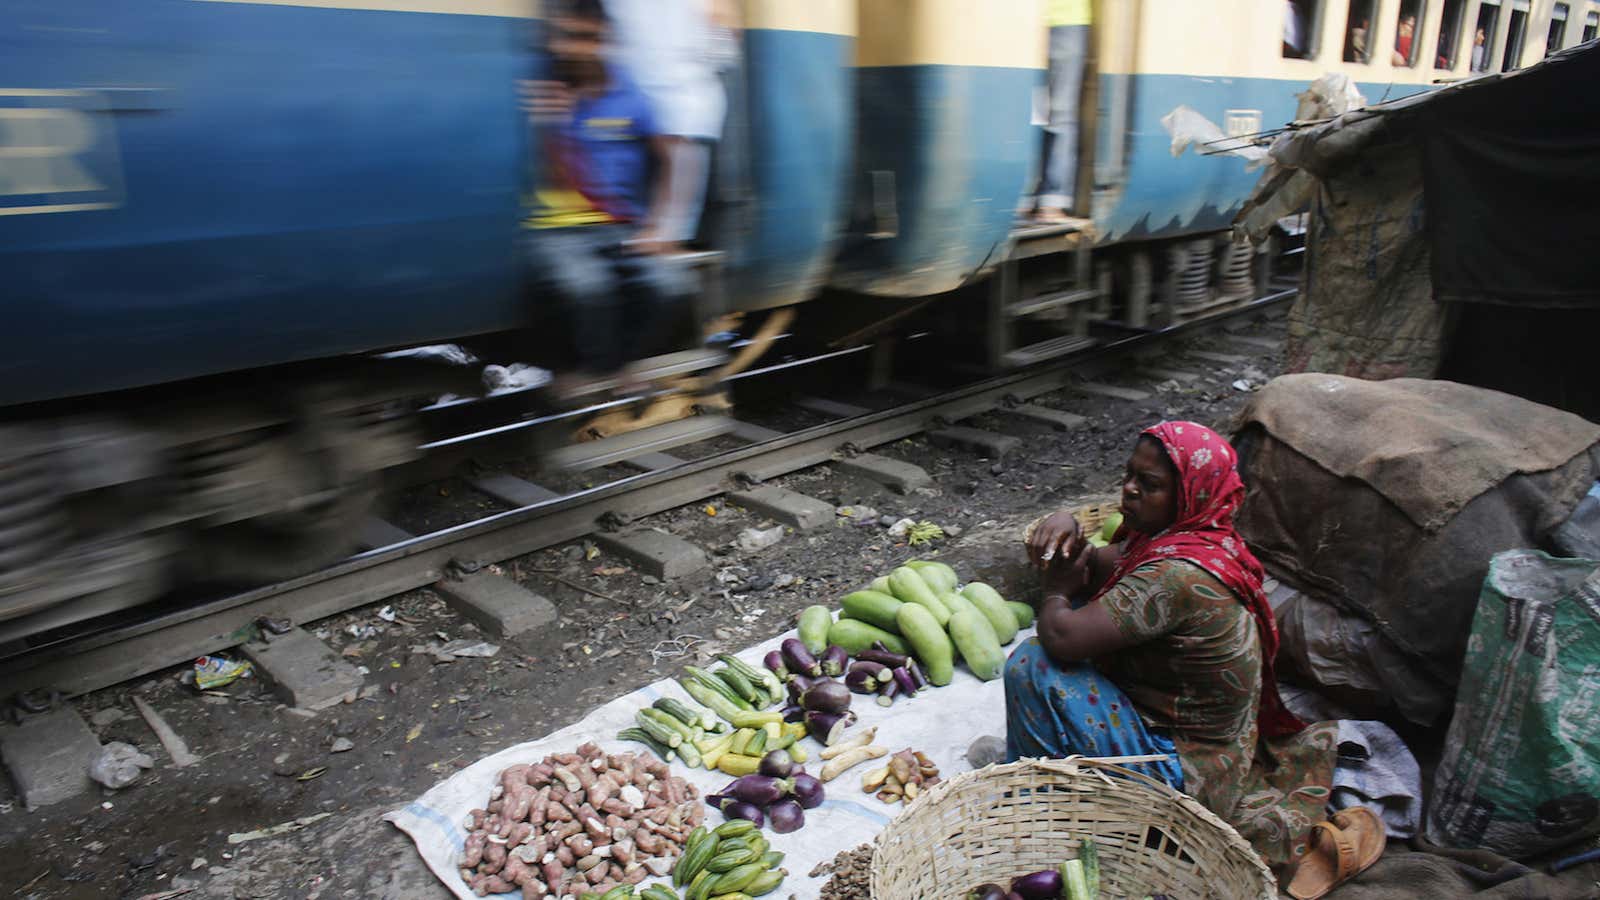 In most trains, you are served tasteless meals prepared in extremely unhygienic conditions.